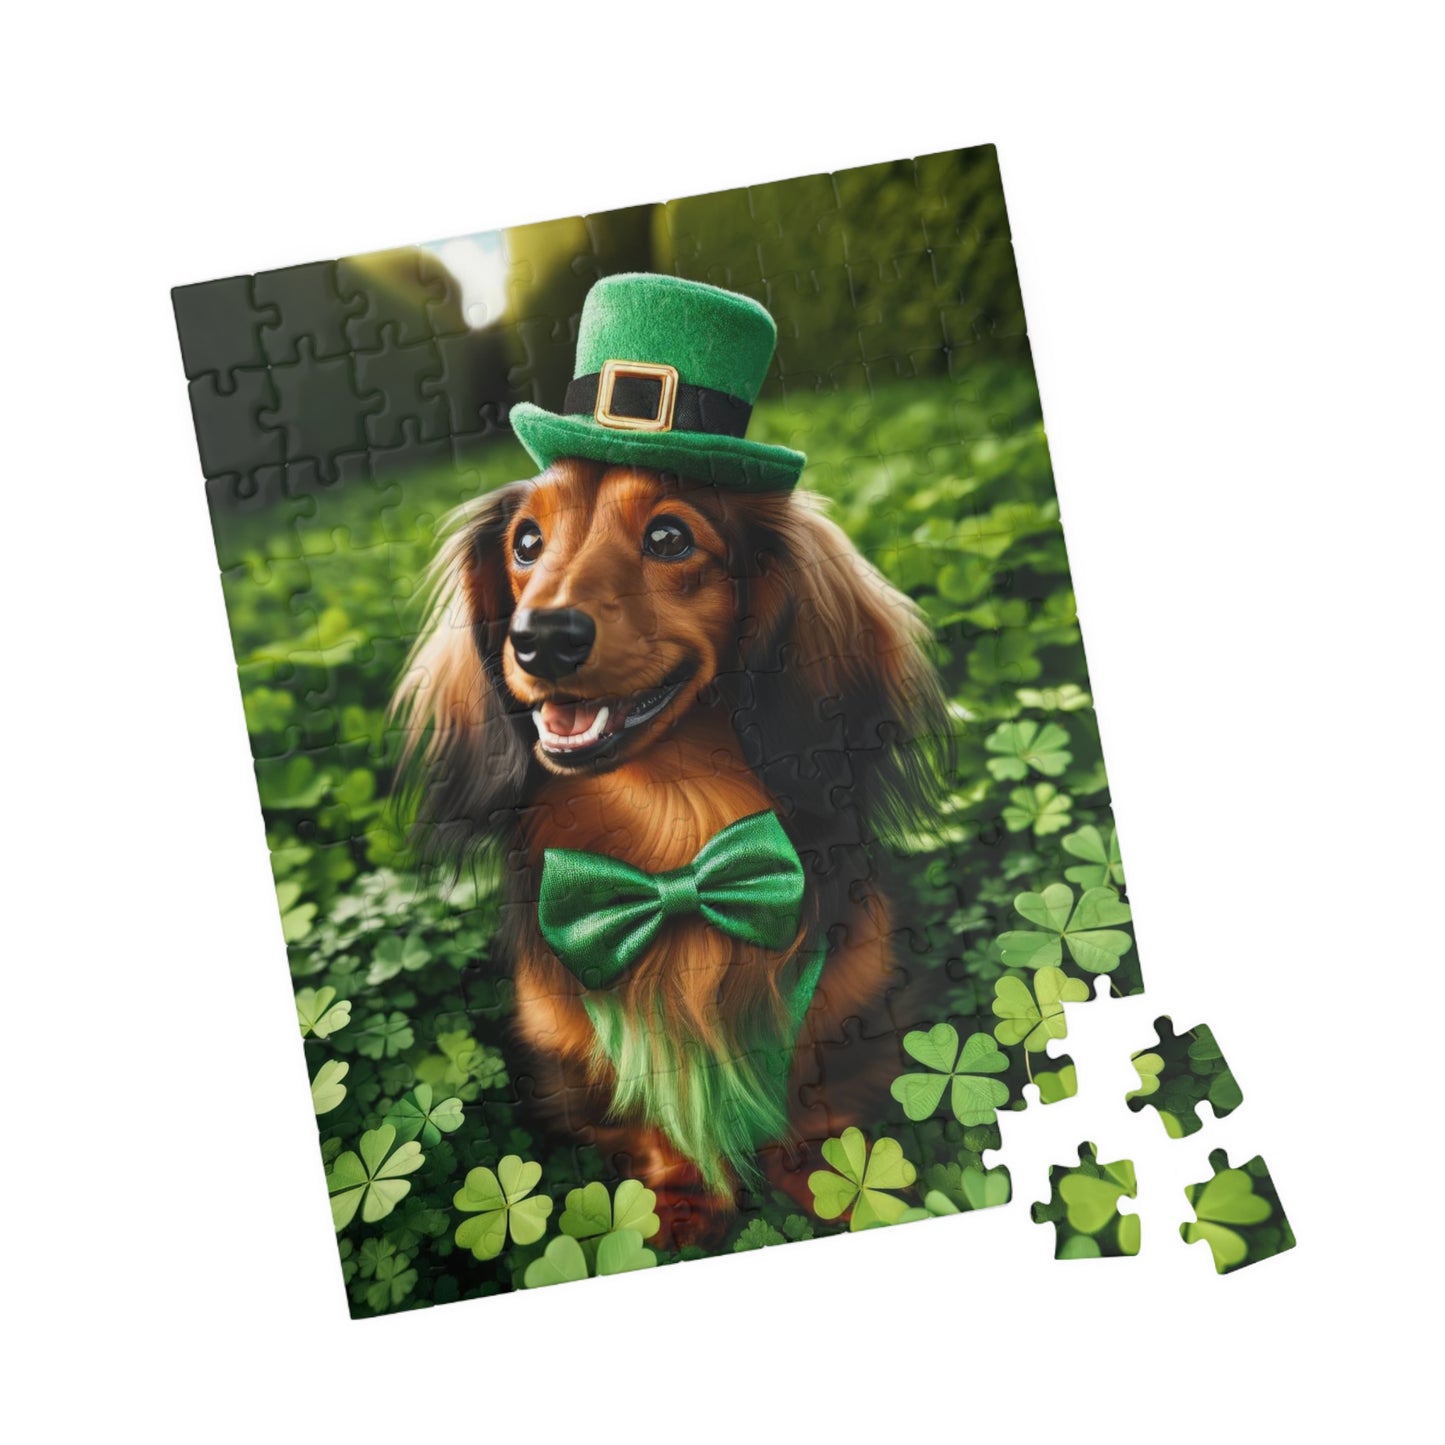 St. Patrick's Day Leprechaun Miniature Dachshund Jigsaw Puzzle - Long Haired Chocolate and Cream Mini Doxie 110, 252, 520 or 1014 Pieces